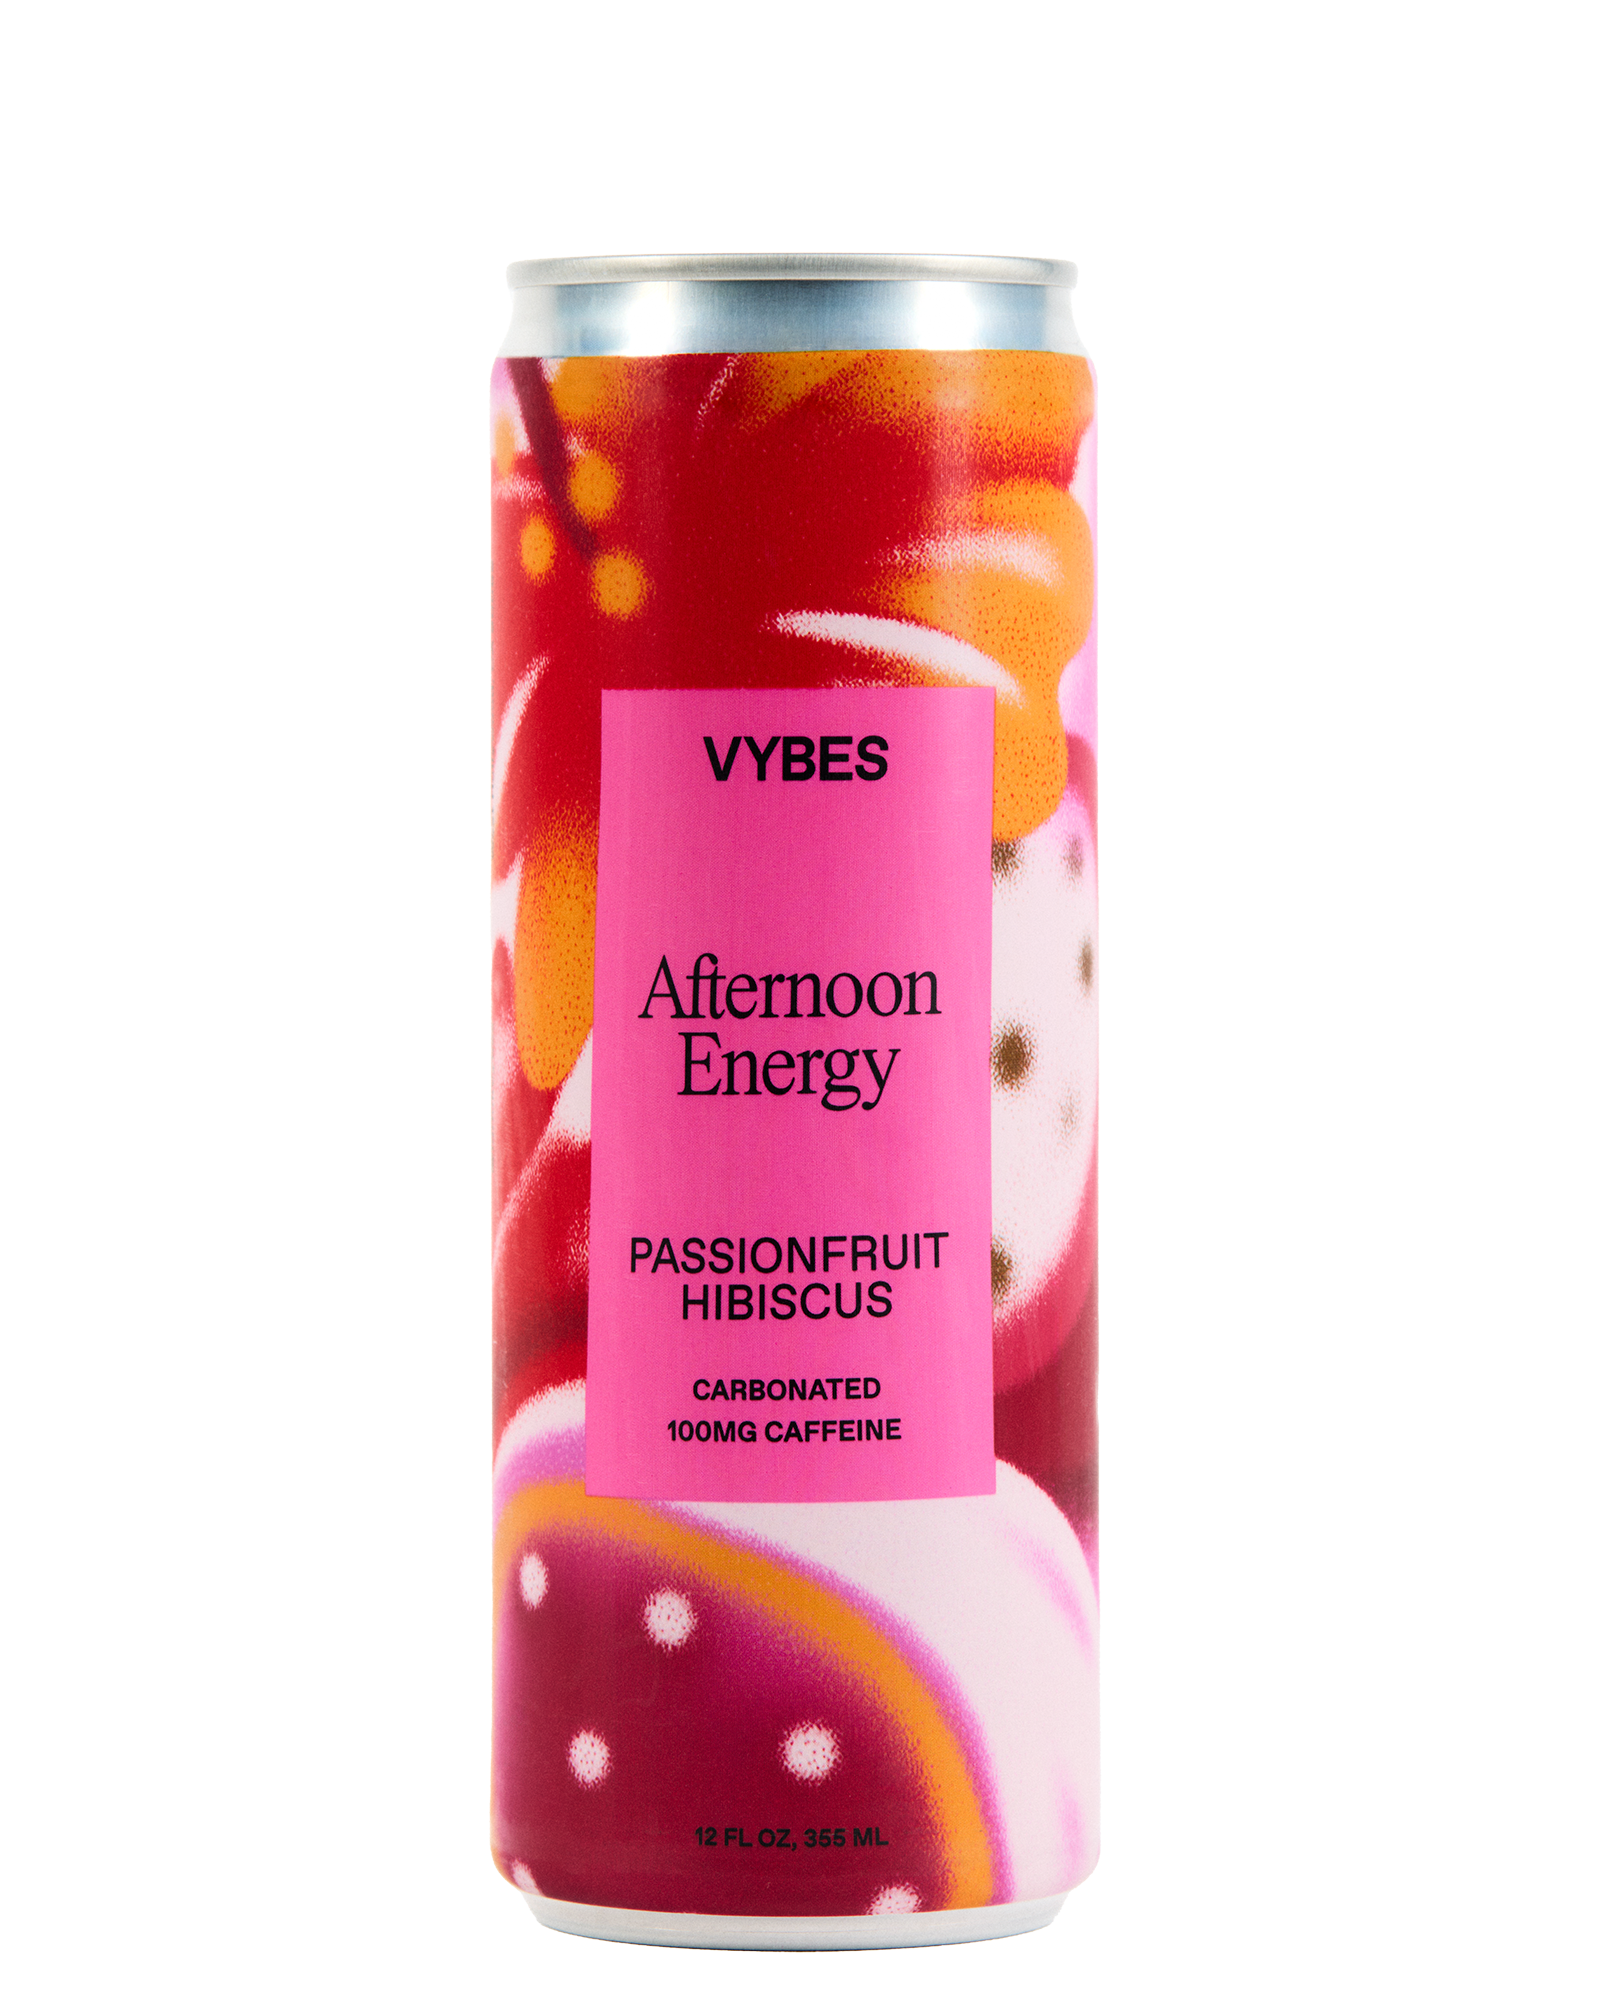 AFTERNOON ENERGY - Passionfruit Hibiscus